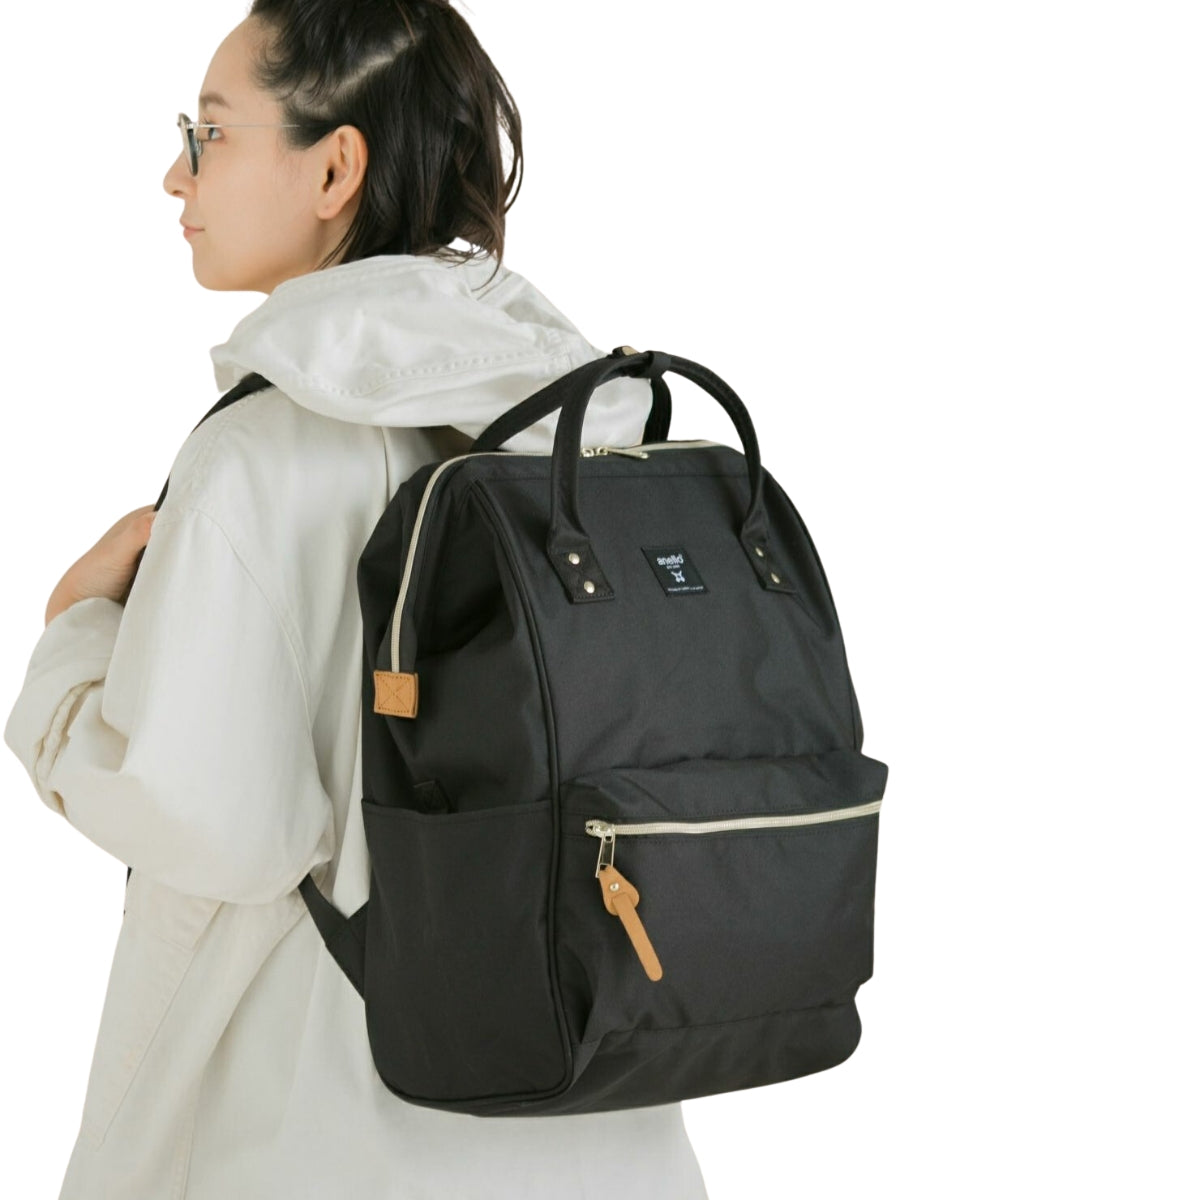 ANELLO BACKPACK reviews